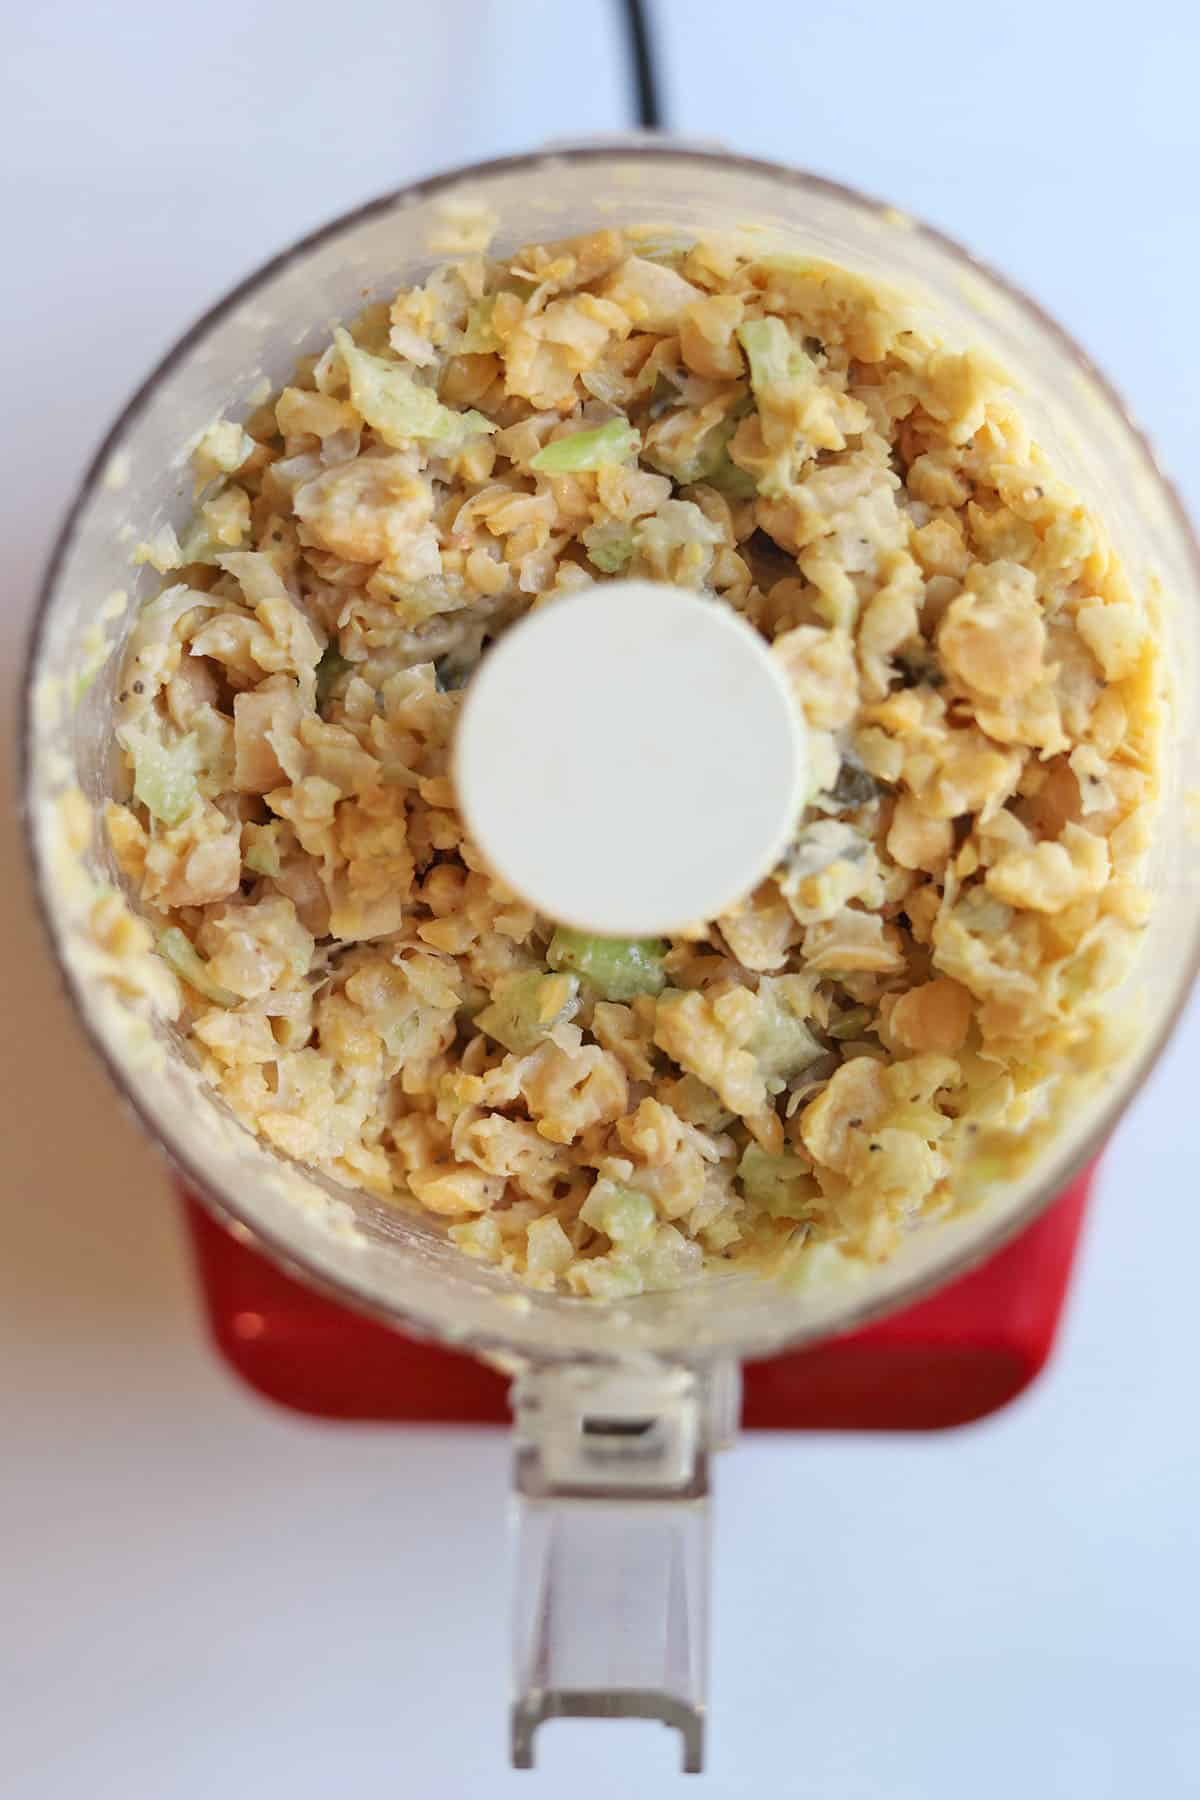 Blended chickpea salad in food processor container.